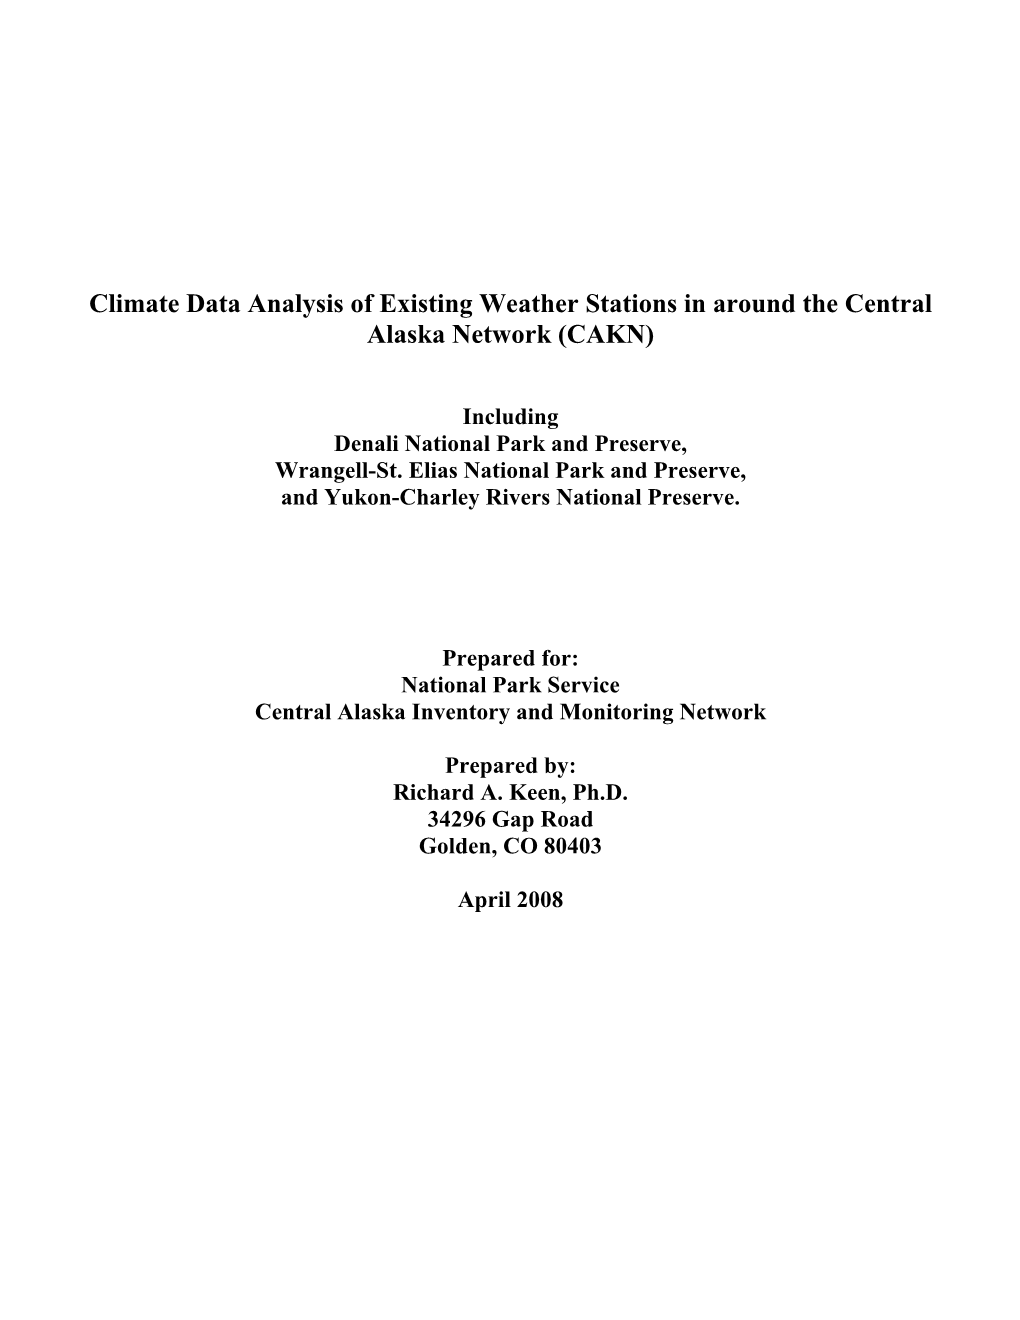 Climate Data Analysis of Existing Weather Stations in Around the Central Alaska Network (CAKN)